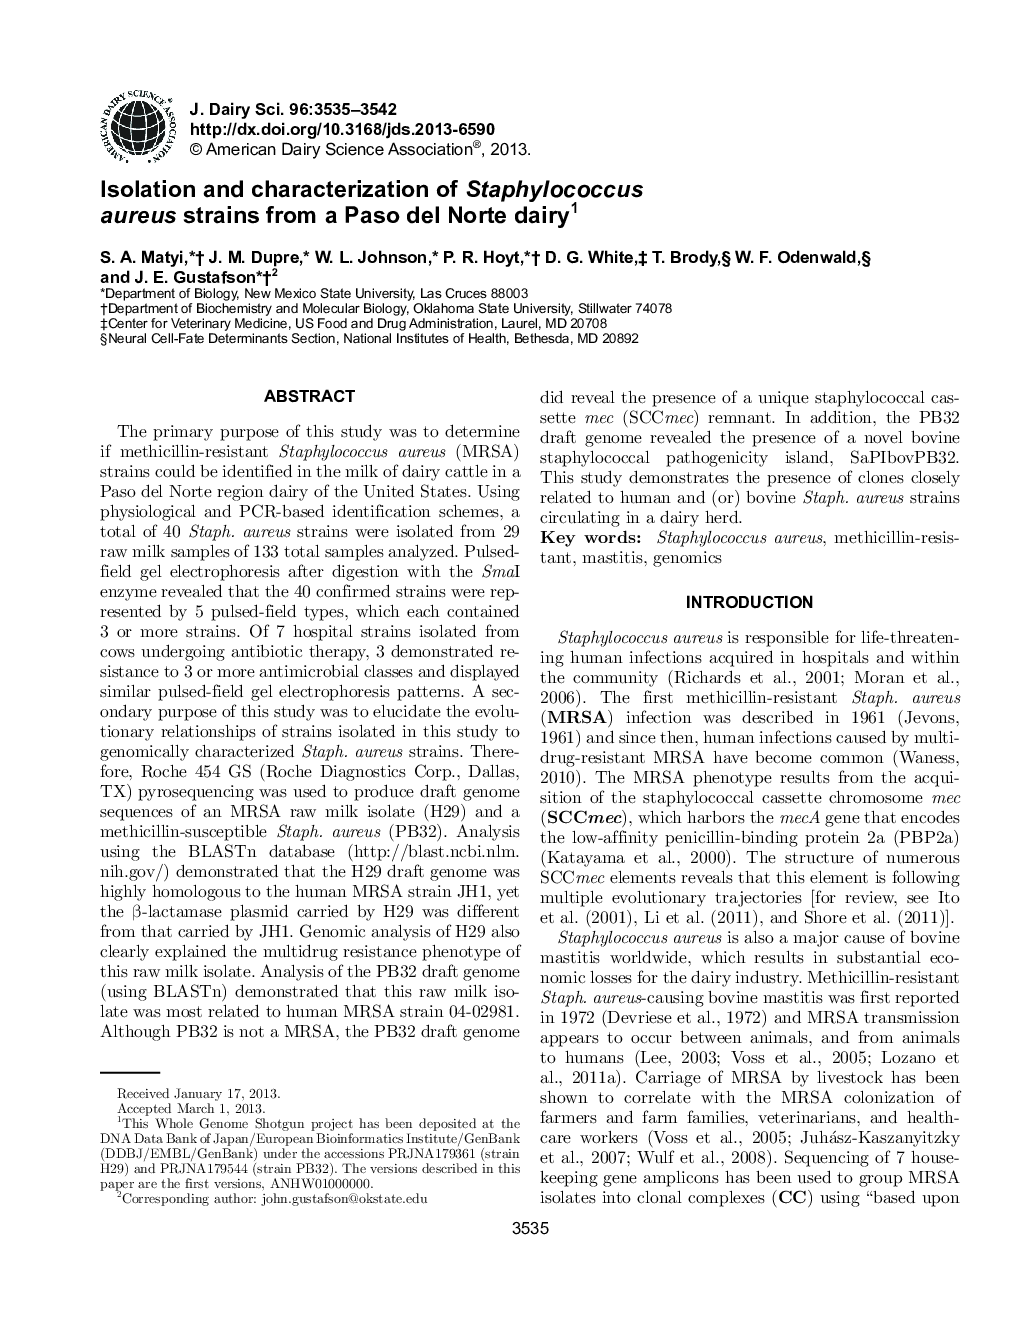 Isolation and characterization of Staphylococcus aureus strains from a Paso del Norte dairy1